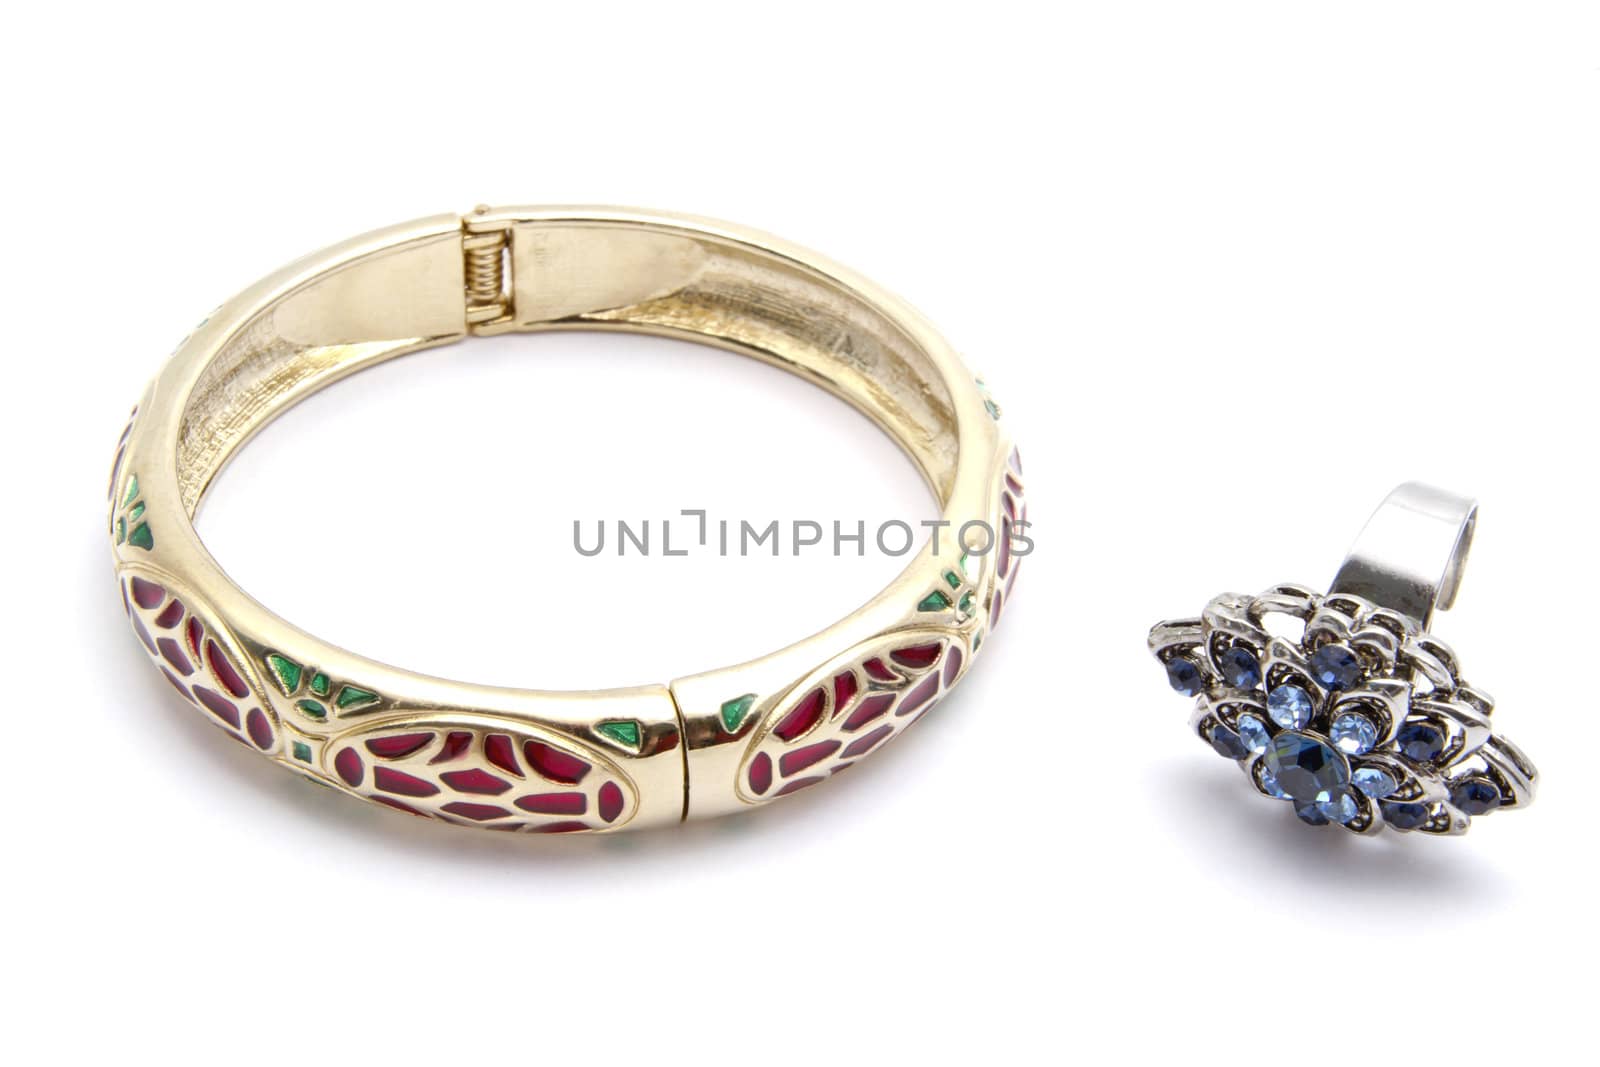 Beautiful bracelet and ring by ibphoto